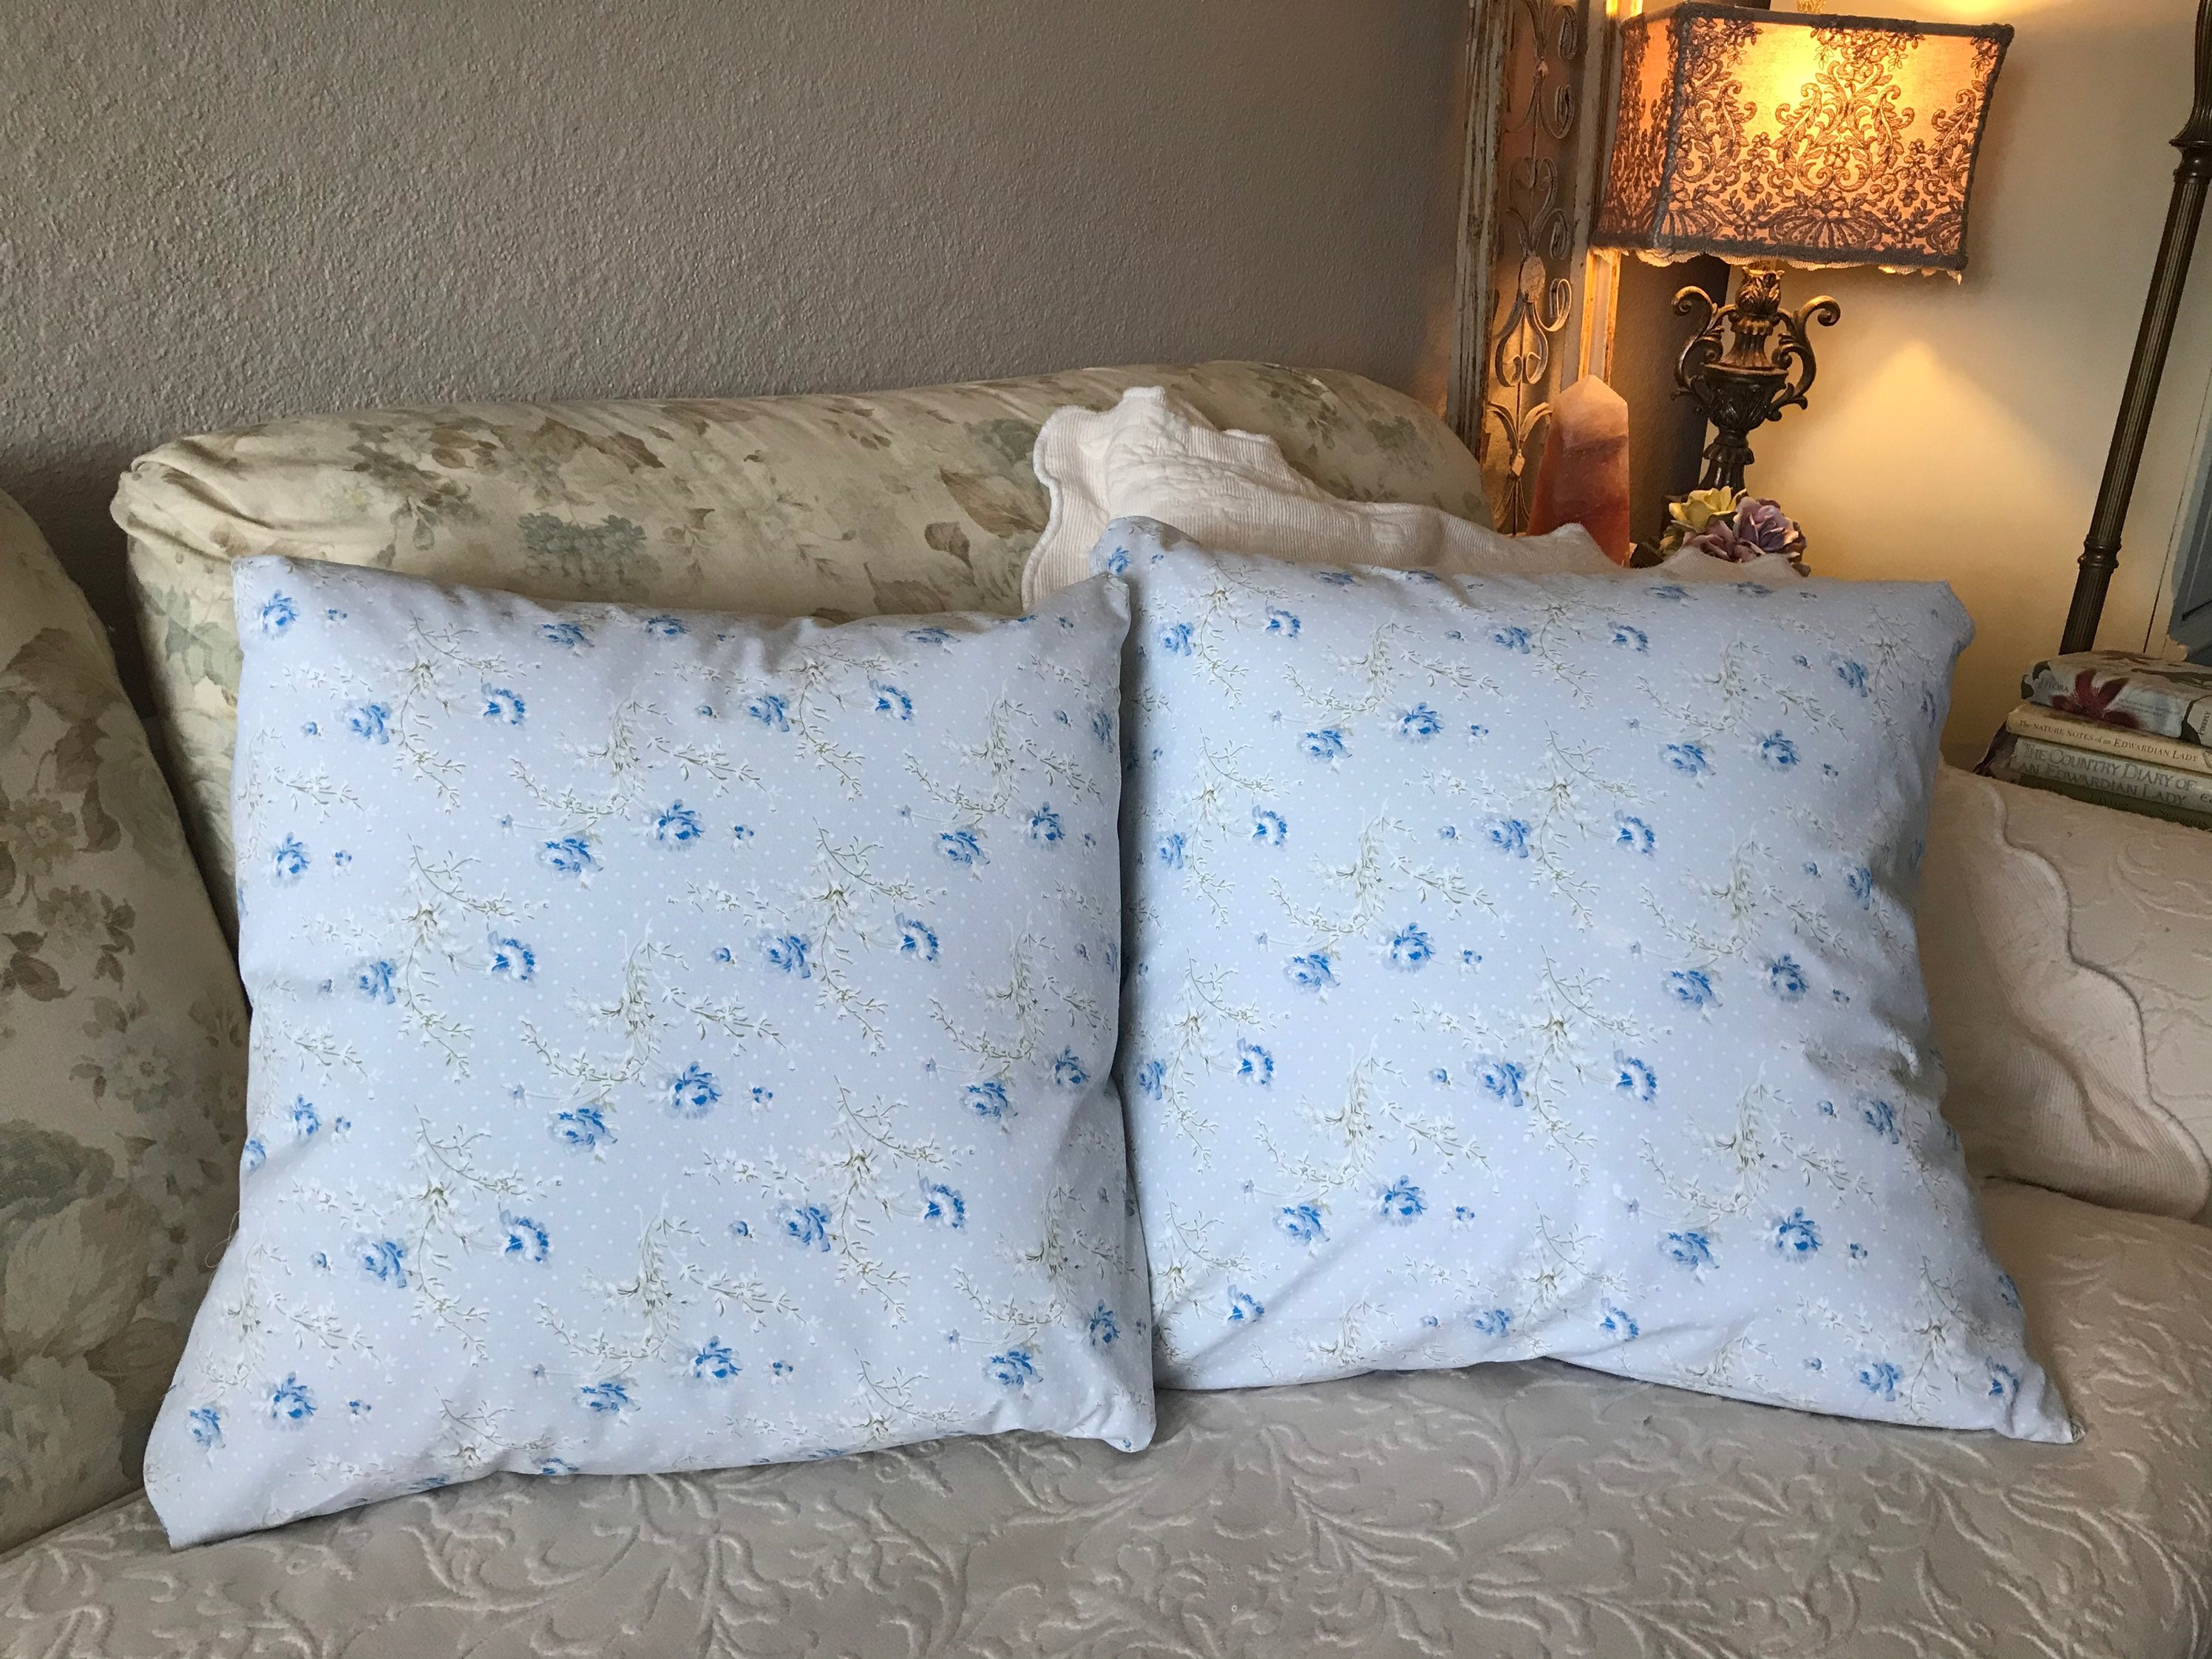 ding afstand vaardigheid SHABBY CHIC Pillow Cover Beautiful and Dainty Floral in Shabby - Etsy